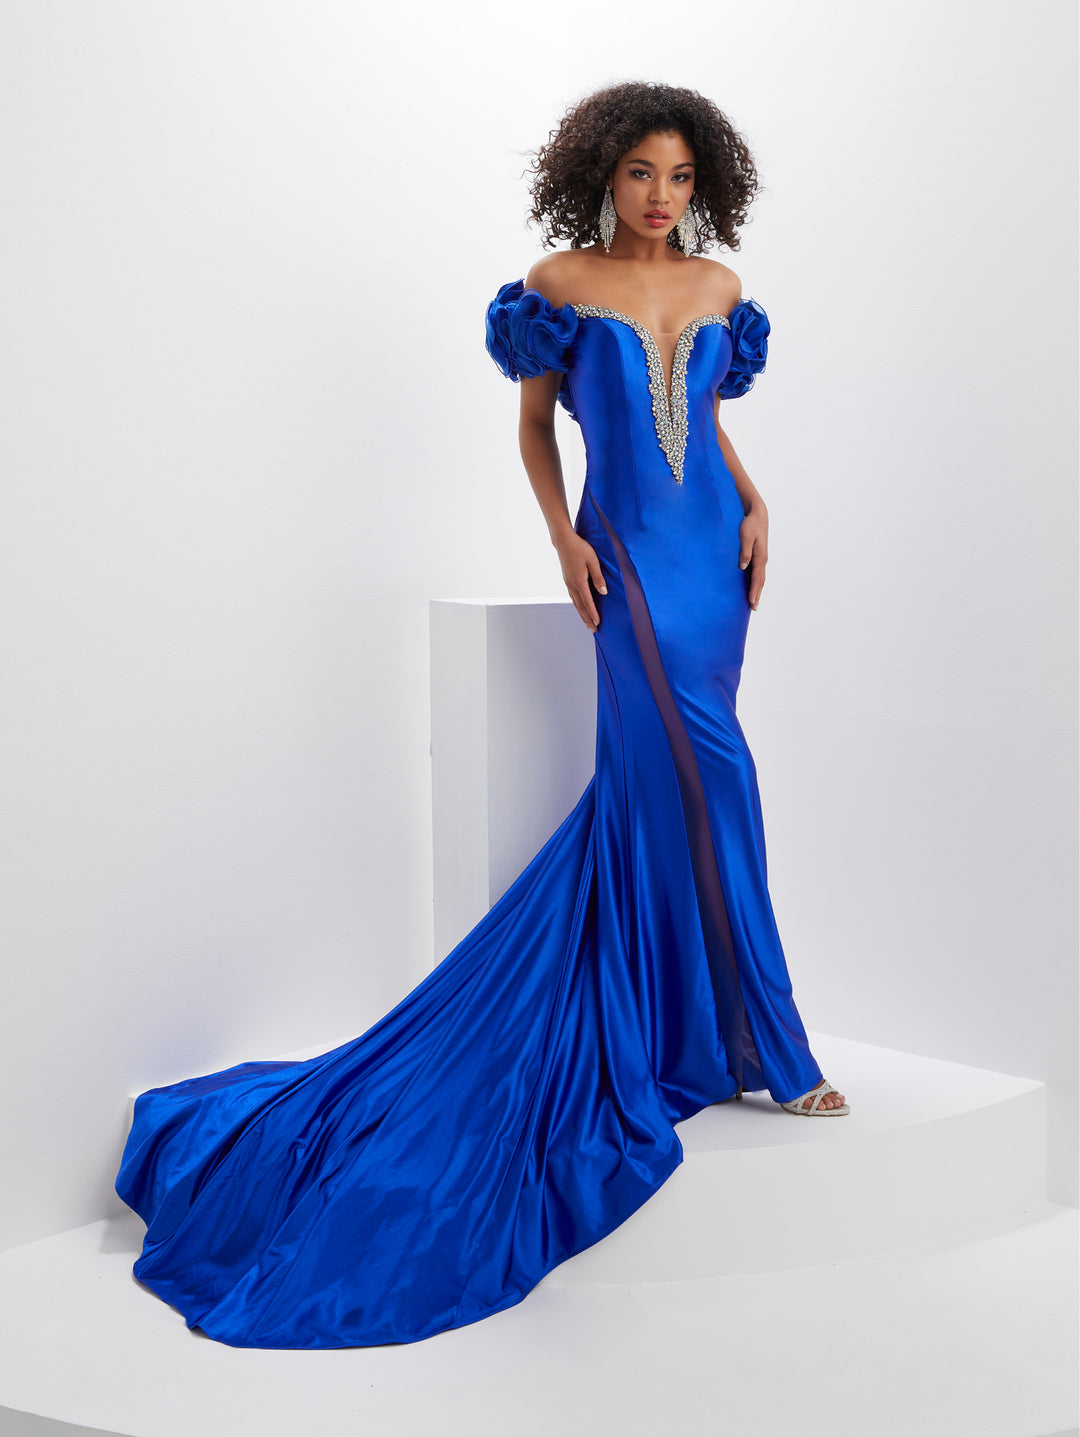 Beaded Satin Off Shoulder Mermaid Dress by Panoply 14126